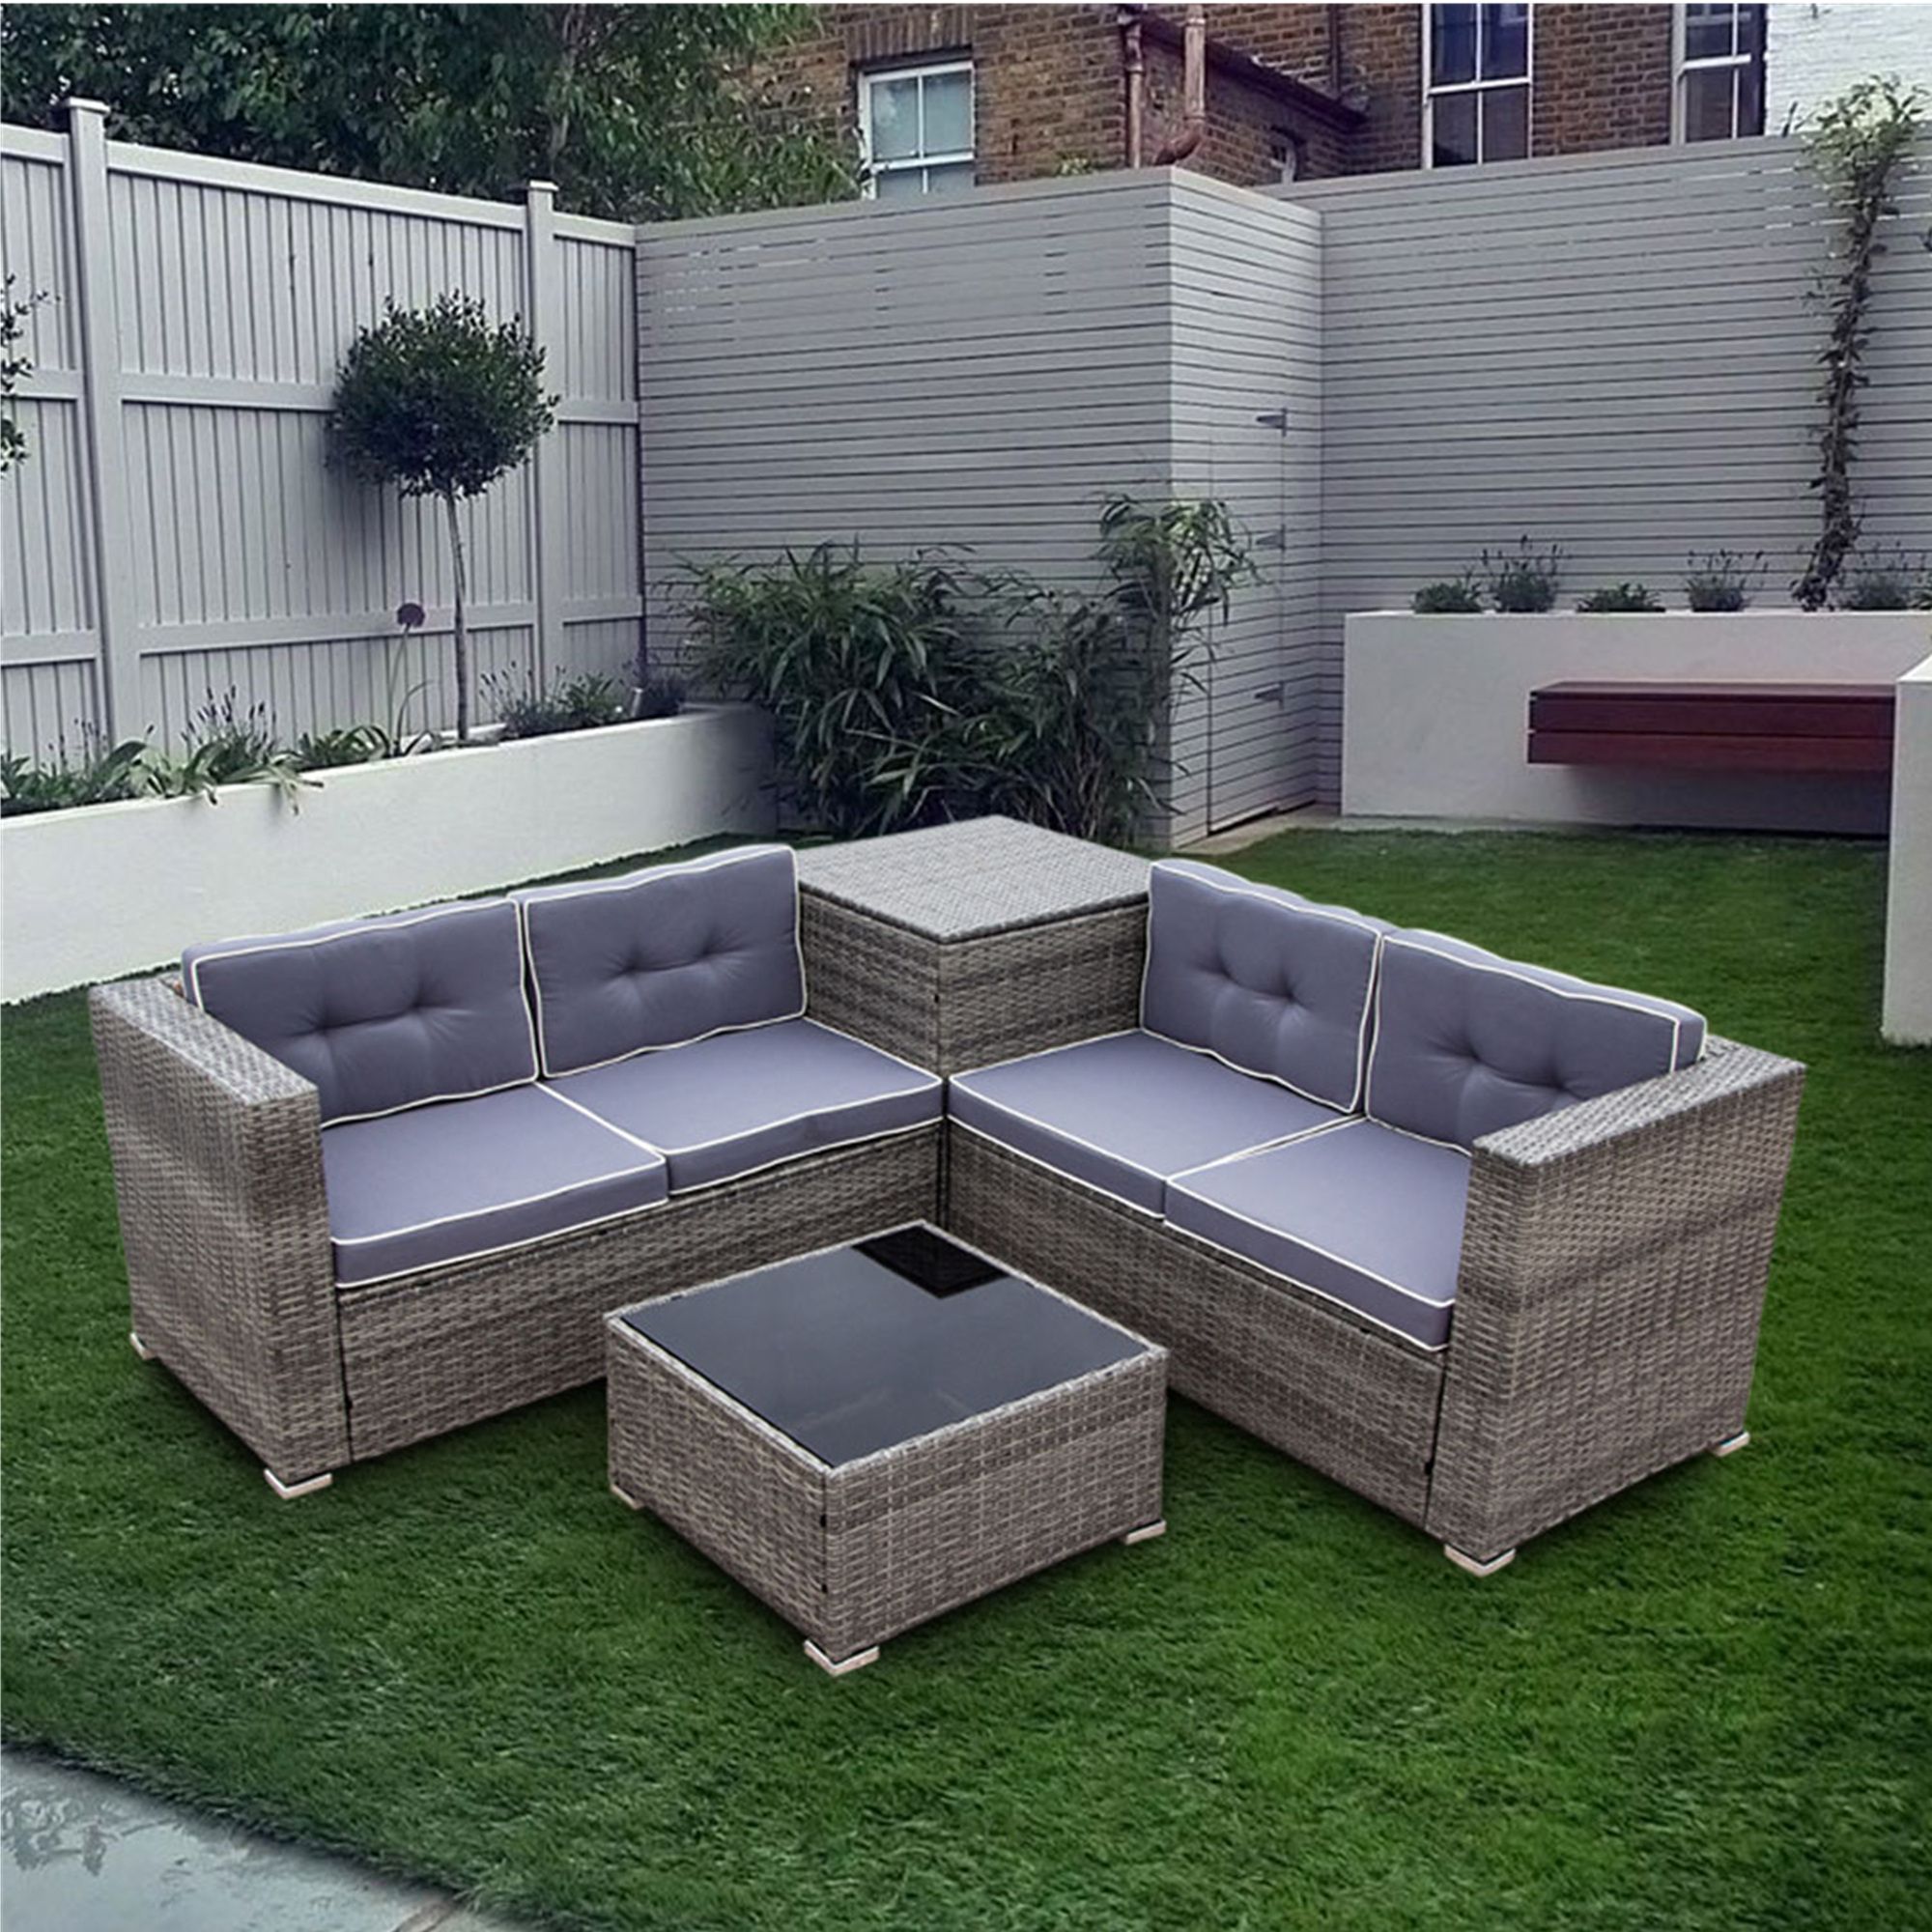 4 Piece Rattan Patio Furniture Sets Clearance, Wicker Bistro Patio Set Throughout Outdoor Seating Sectional Patio Sets (View 1 of 15)